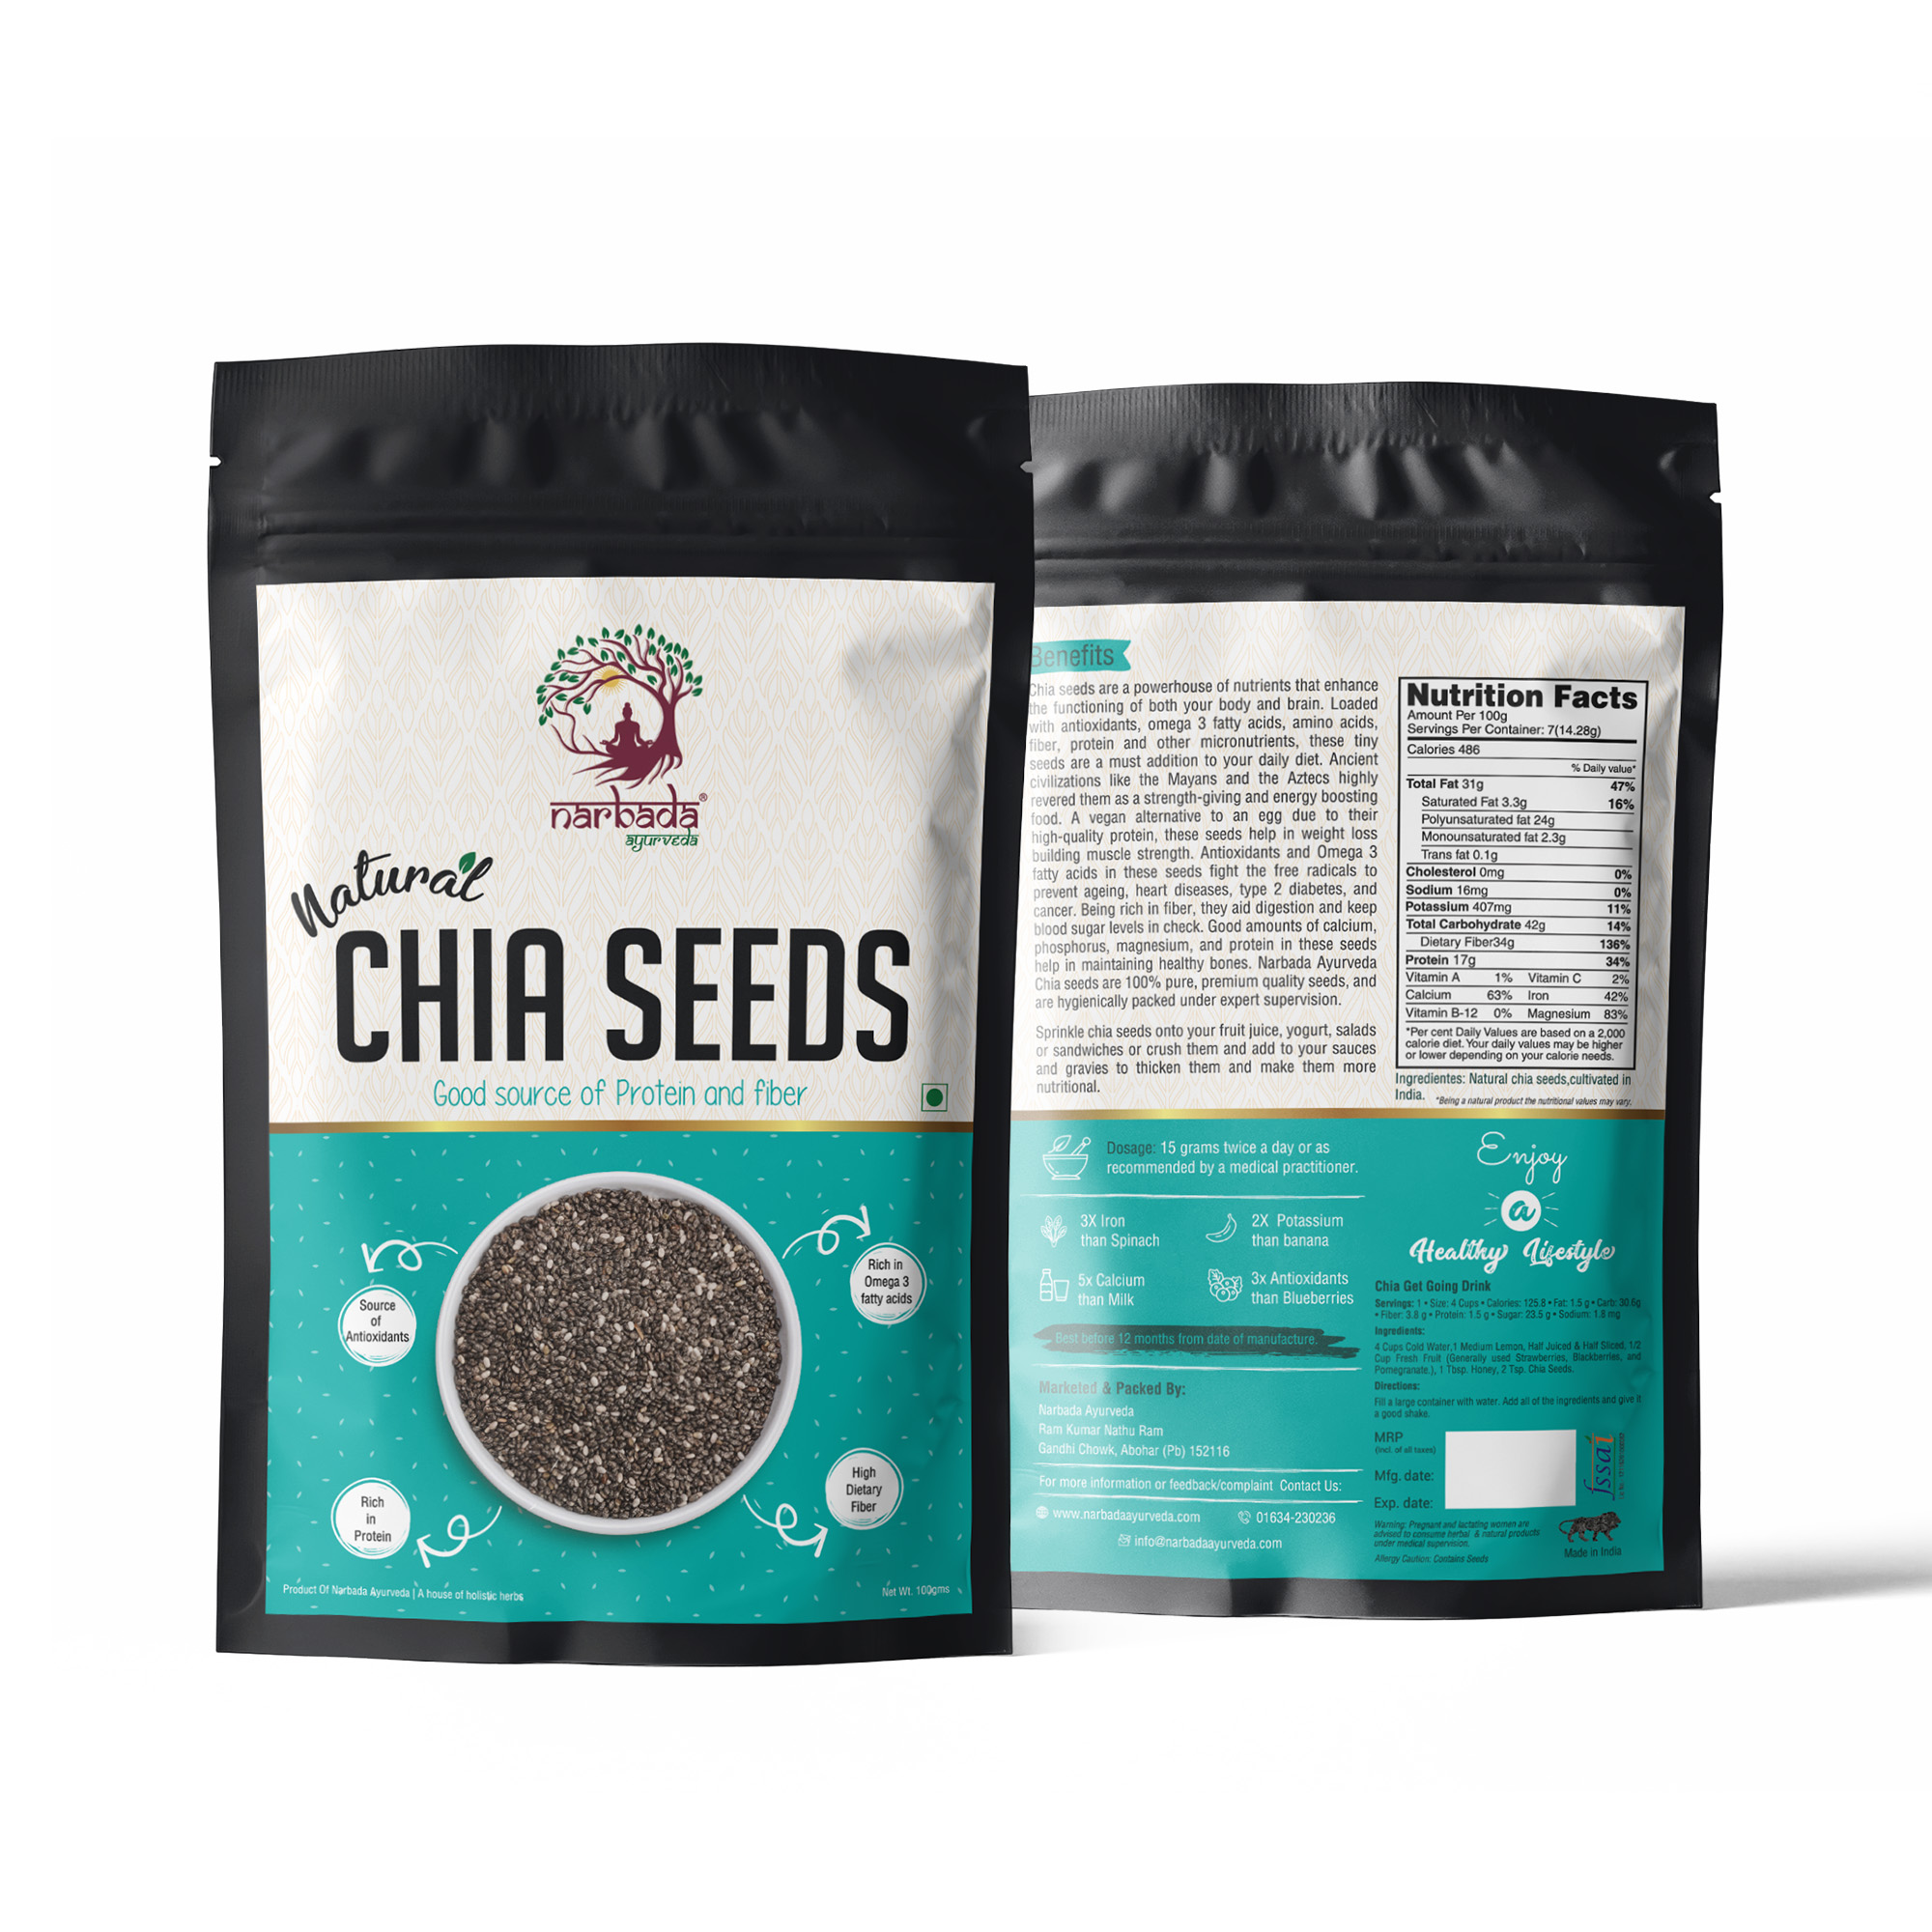 Buy Narbad Ayurveda Chia Seed at Best Price Online